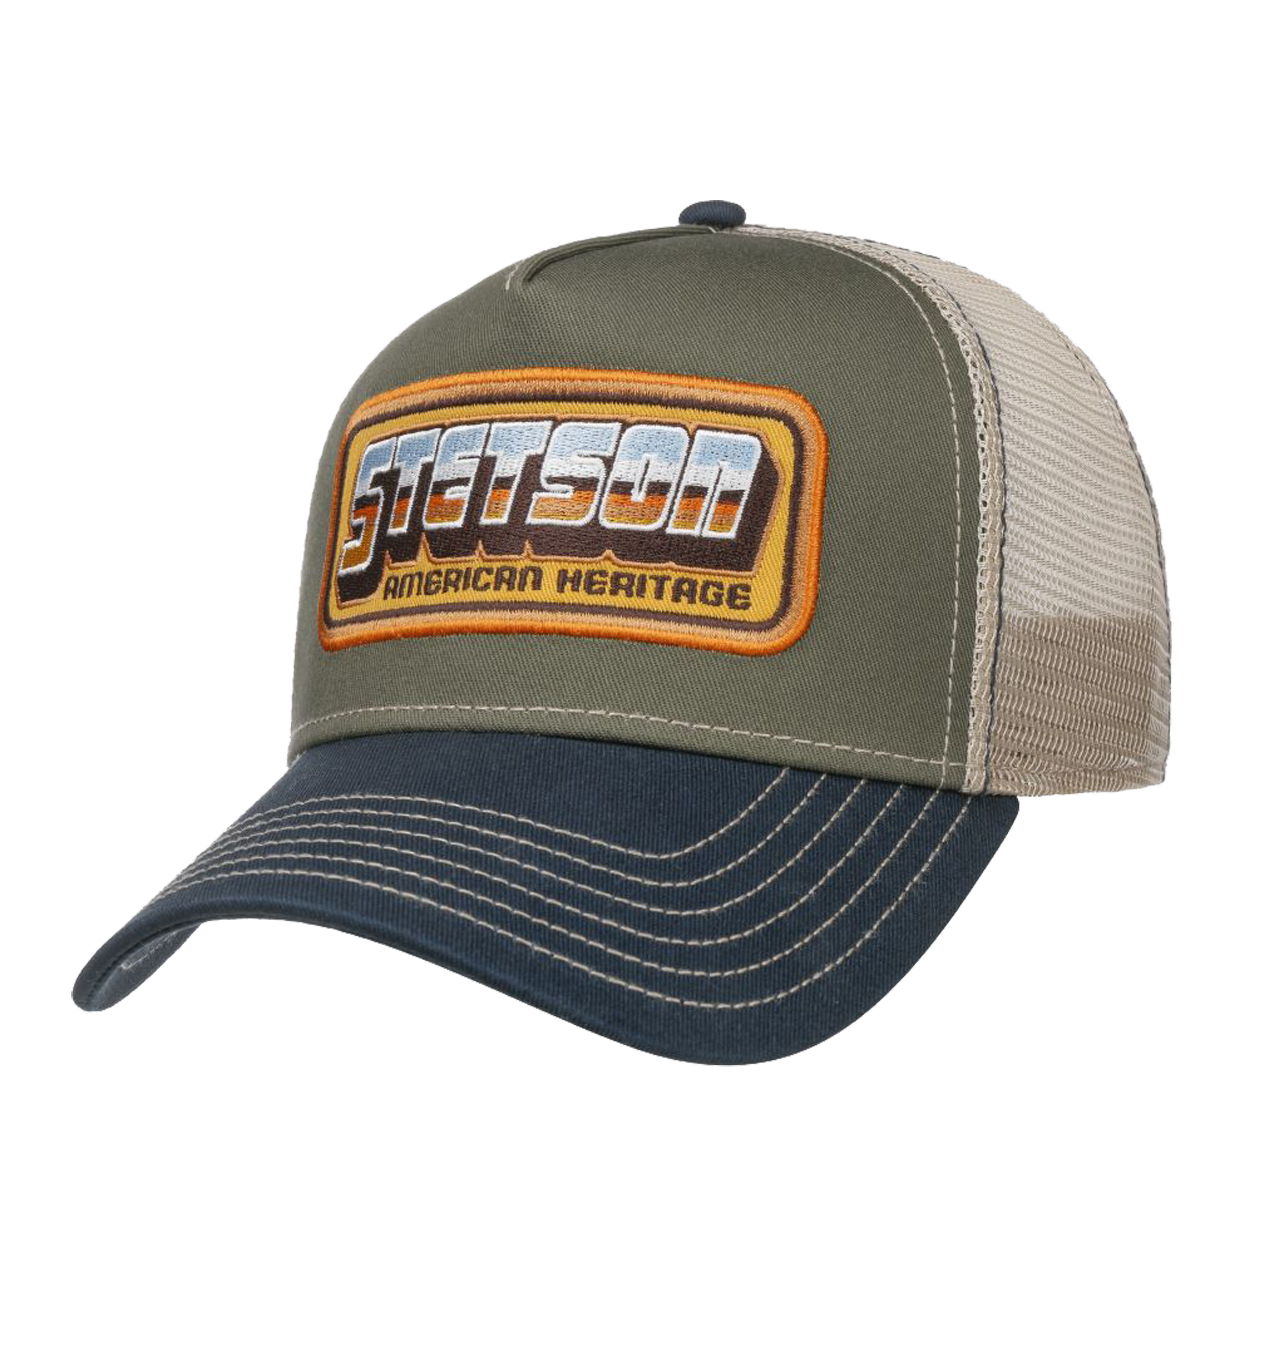 Stetson - American Heritage Patch Trucker Cap - Olive